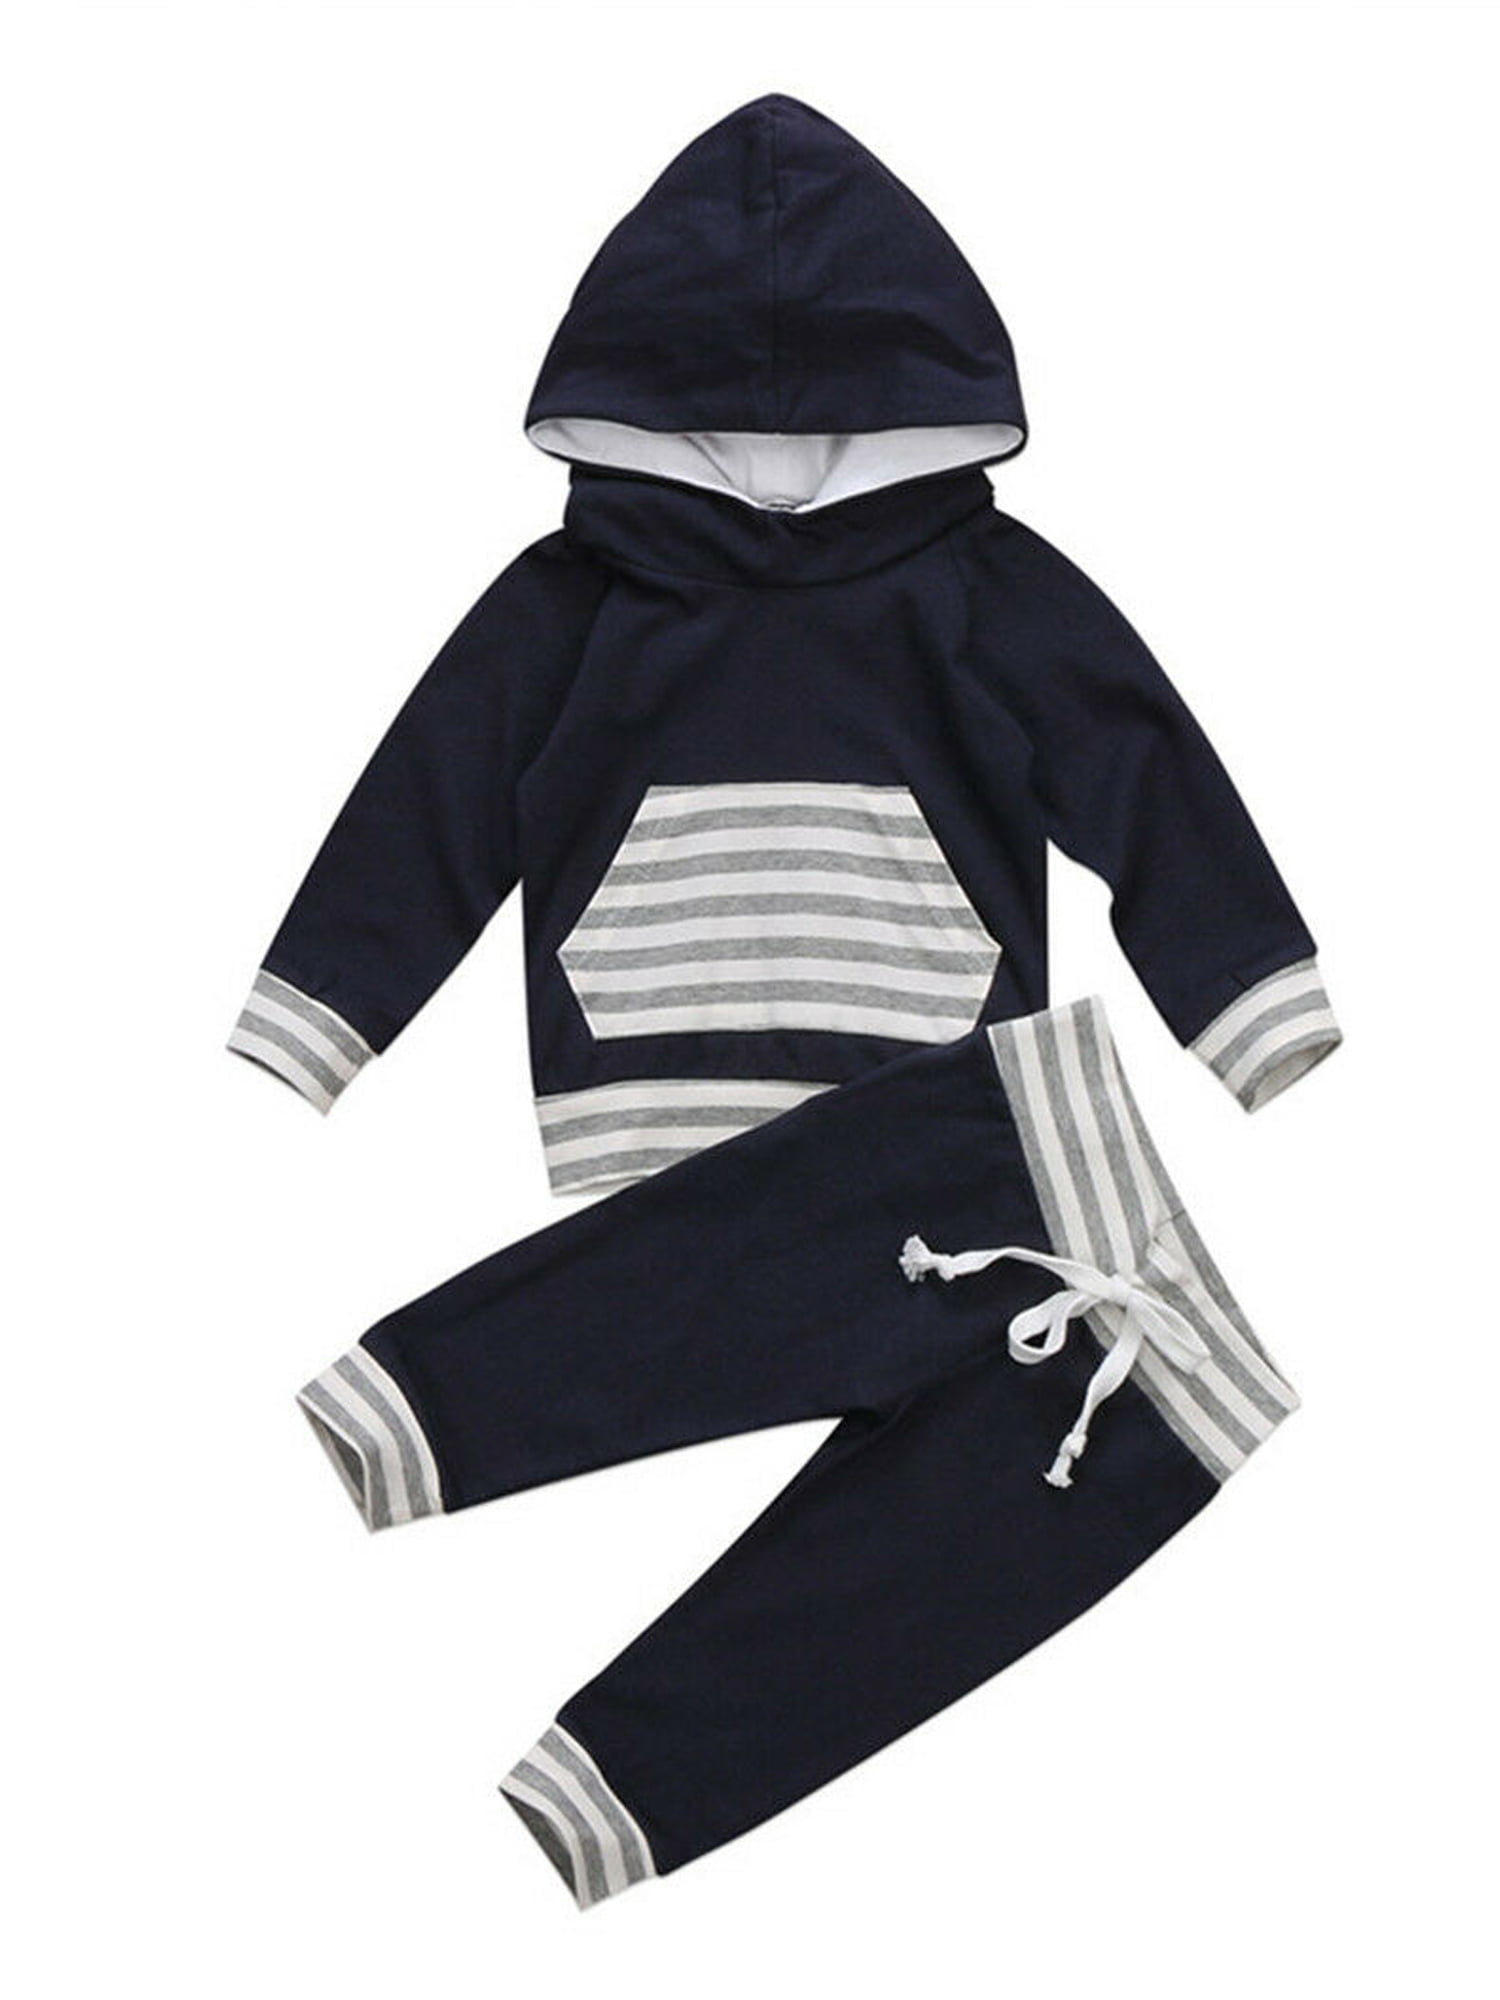 Newborn Baby Boys Fashion Autumn Clothes Hooded Tops Long Pants 2Pcs Outfit Set 